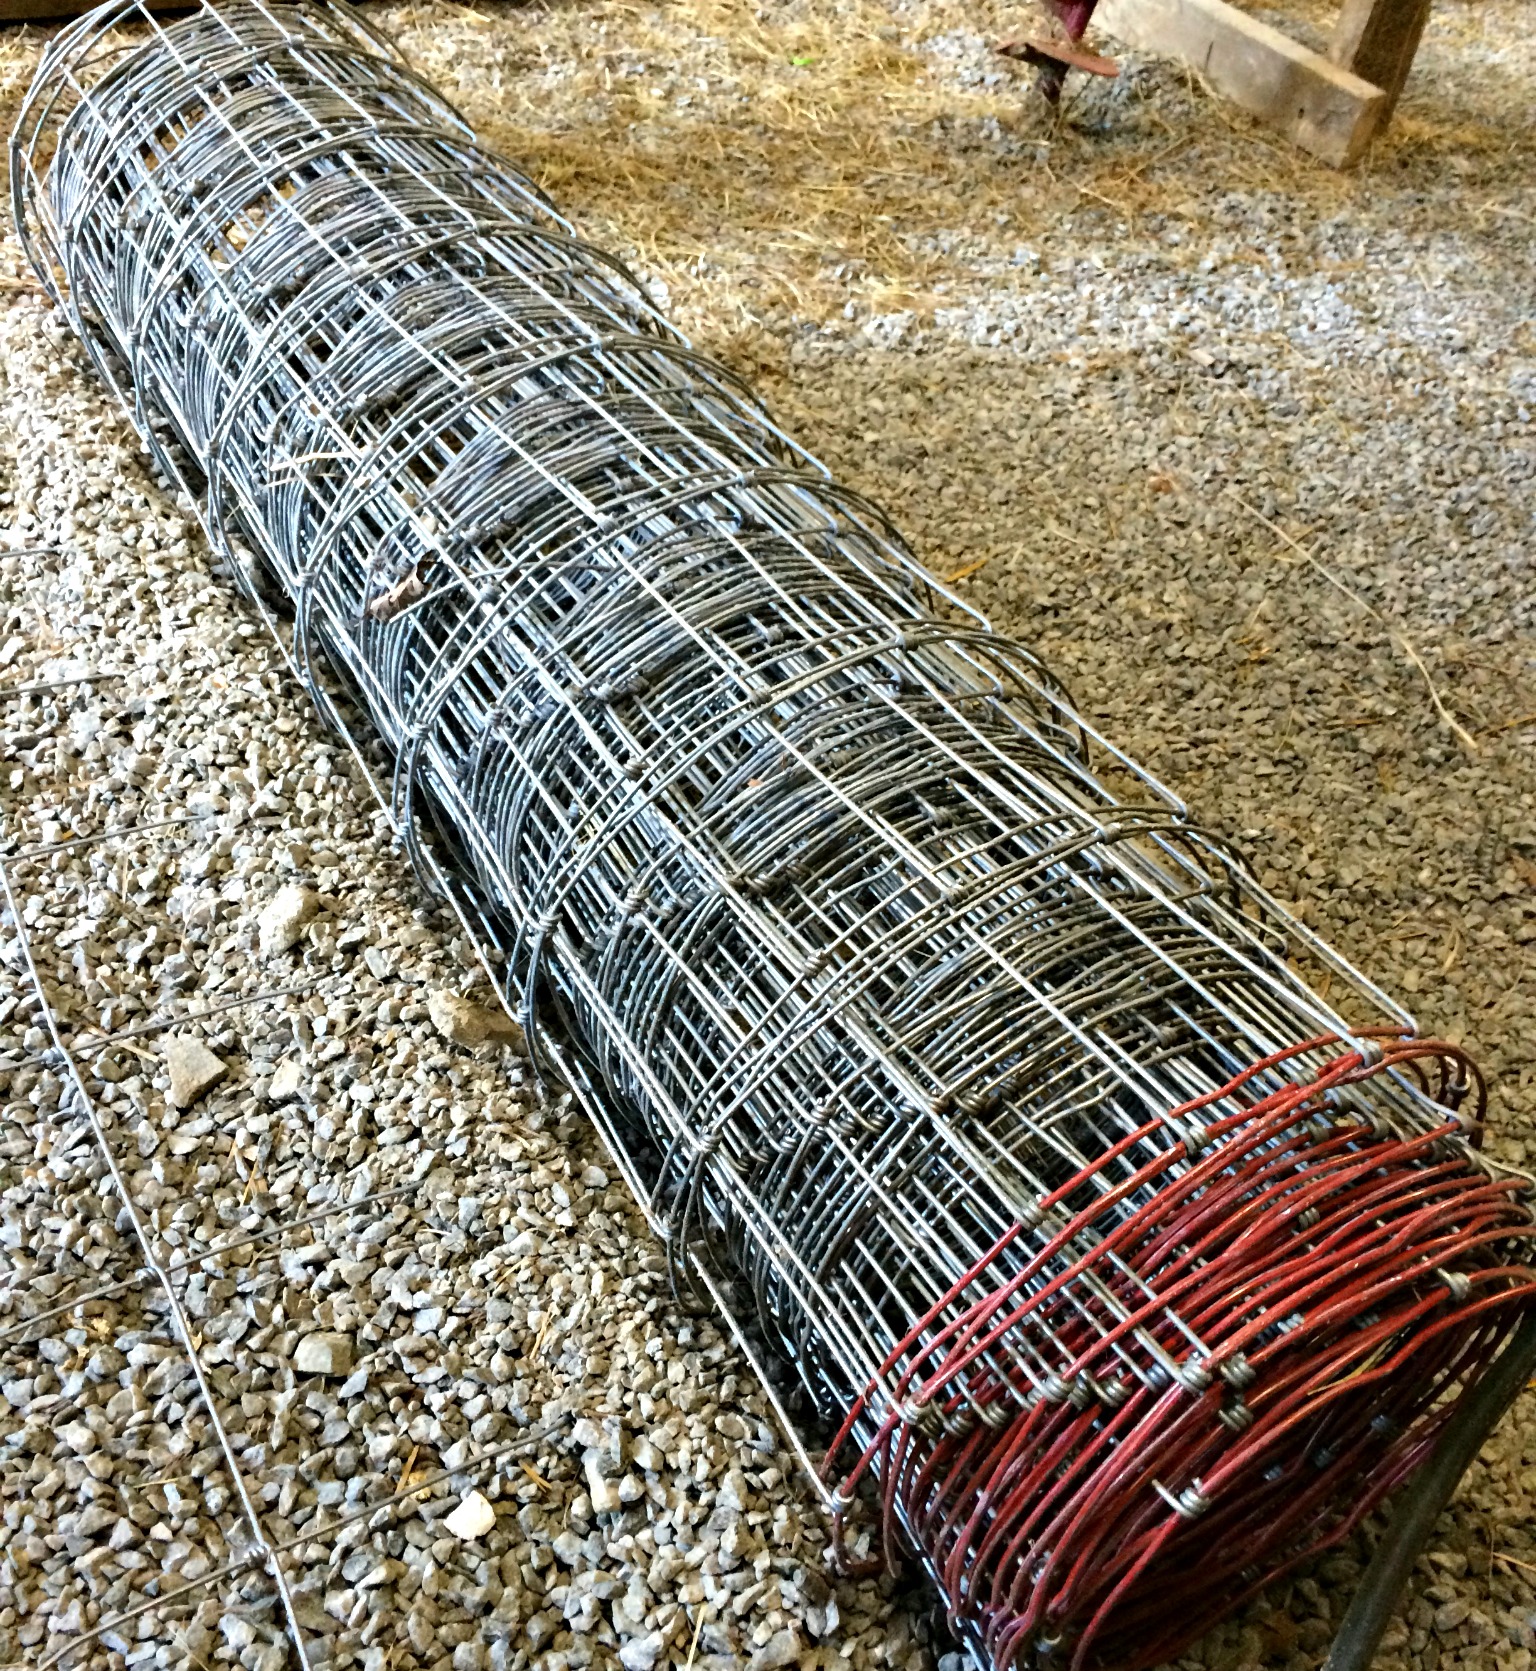 How to Make Tomato Cages From Chicken Wire